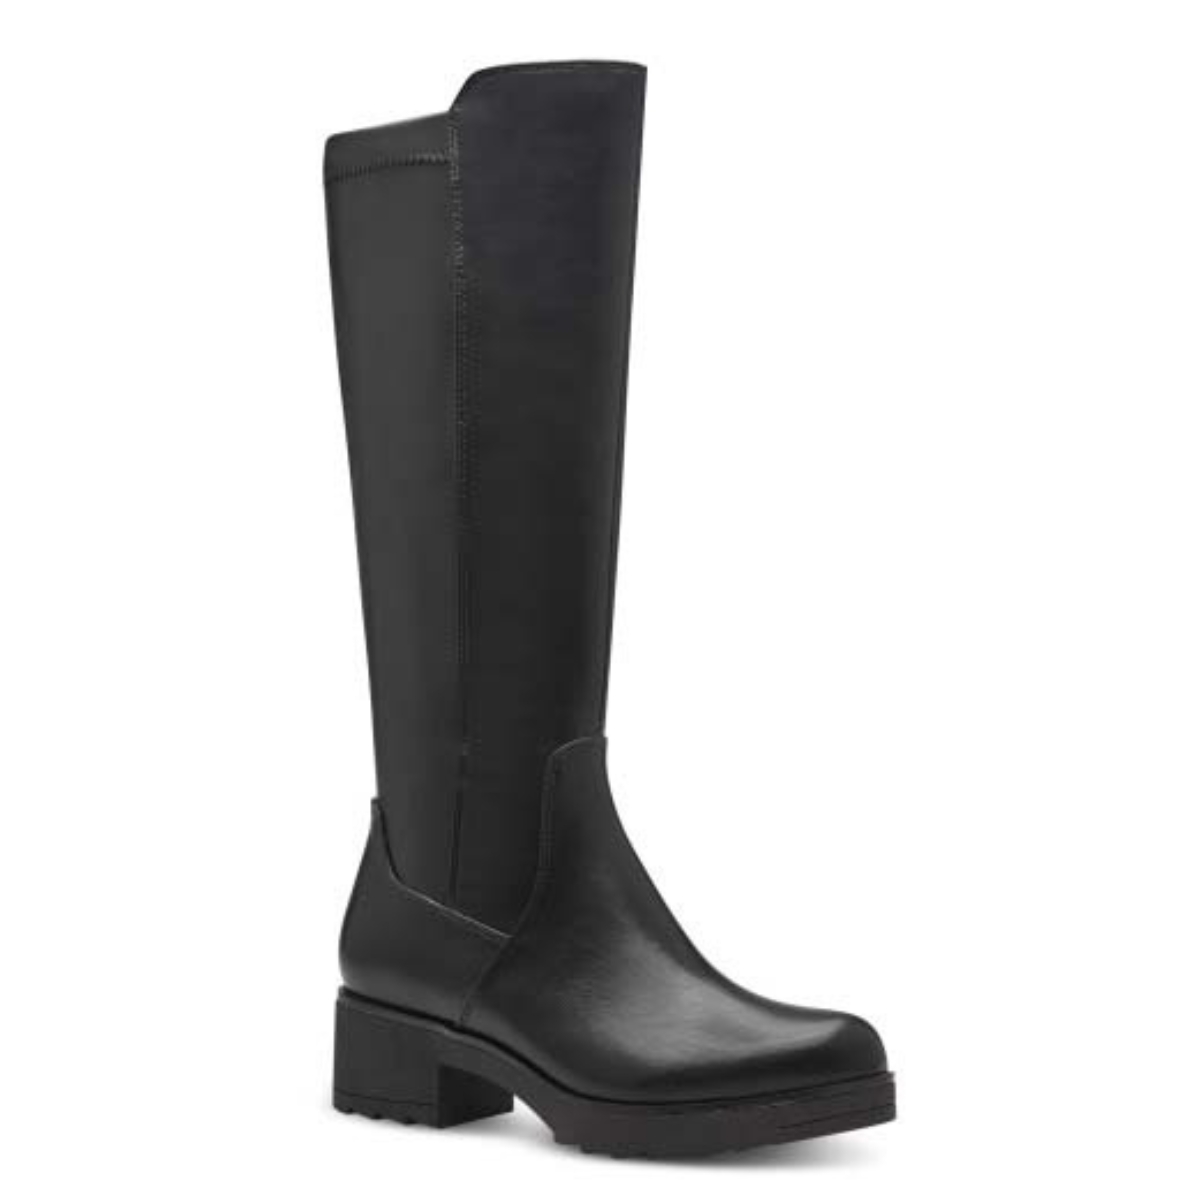 Marco Tozzi Dono Long Black Womens Knee-High Boots 25606-41-001 In Size 39 In Plain Black